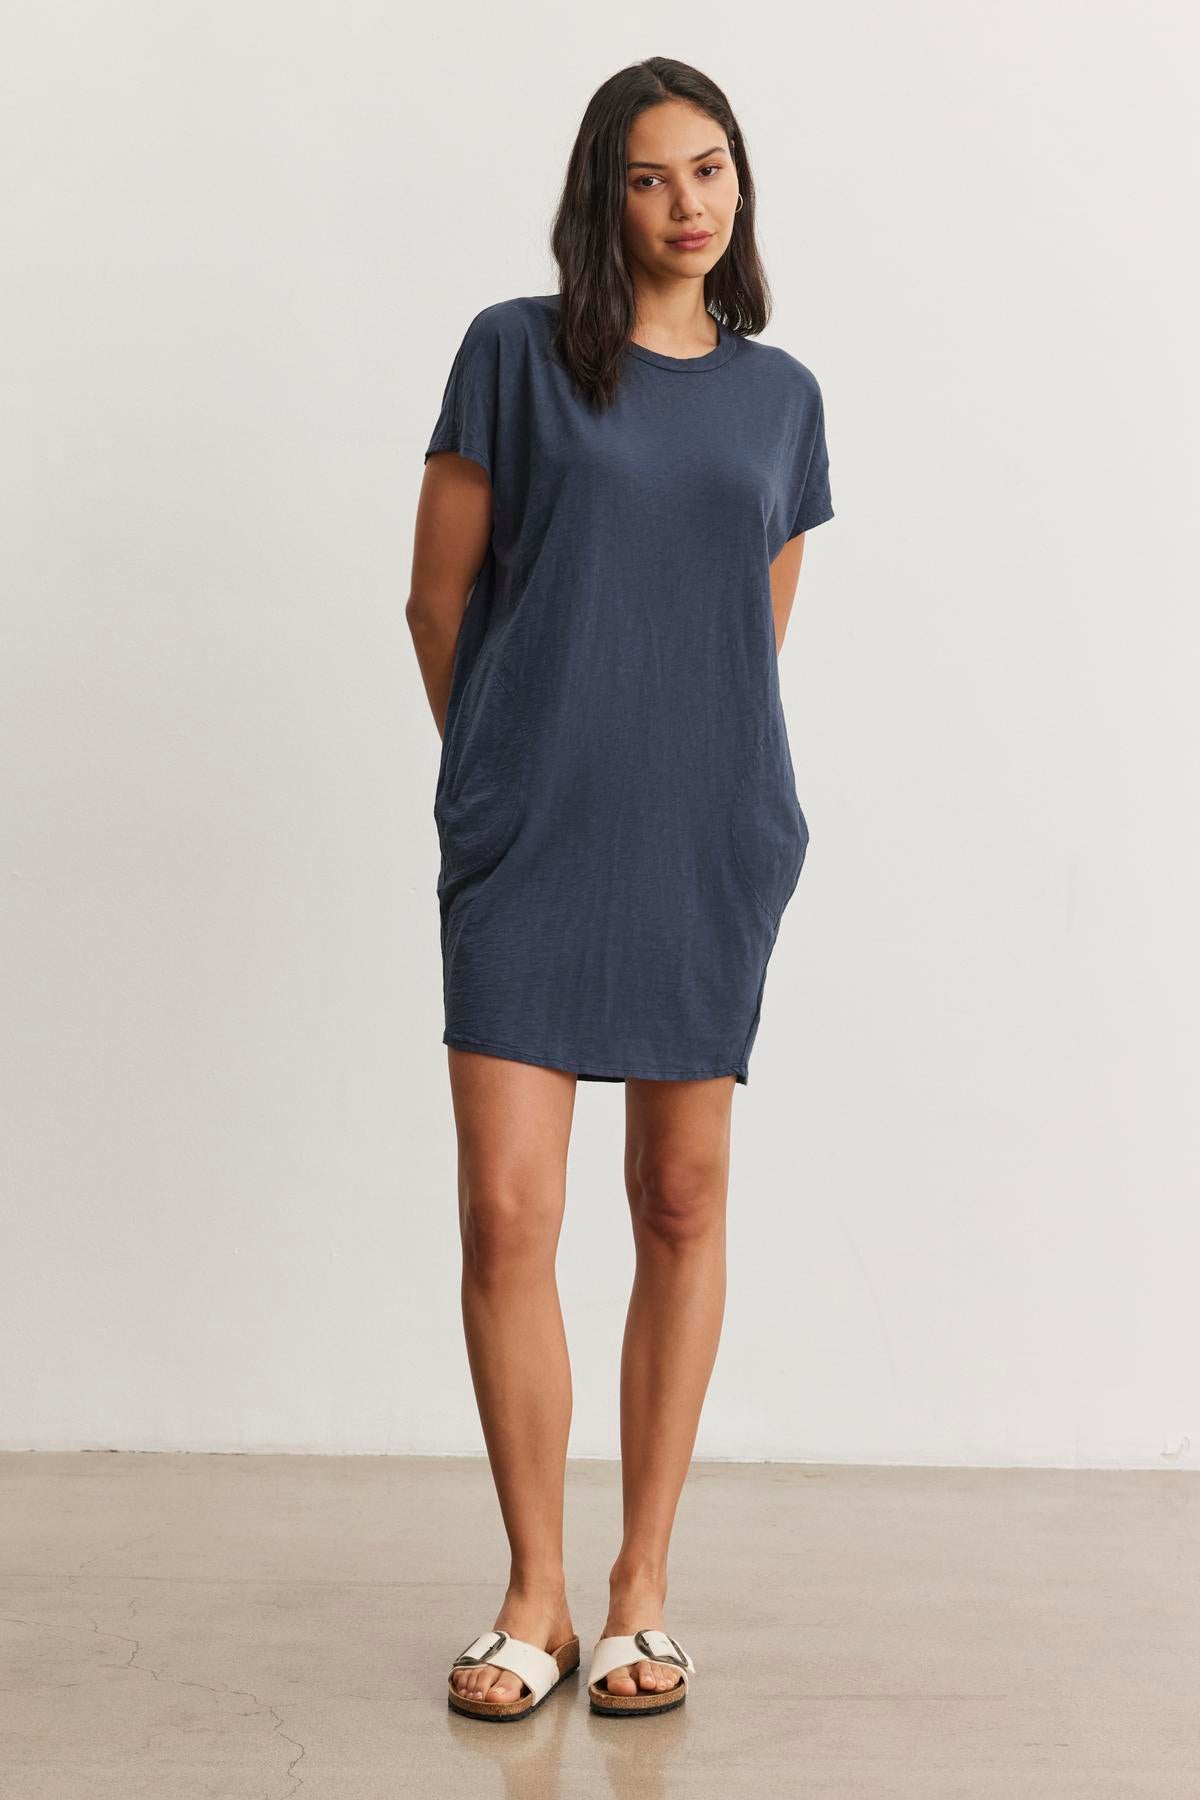 A person with long hair stands wearing a relaxed fit, short-sleeve blue ATHENA DRESS by Velvet by Graham & Spencer with hands in pockets and white sandals, against a plain white background.-37606520193217